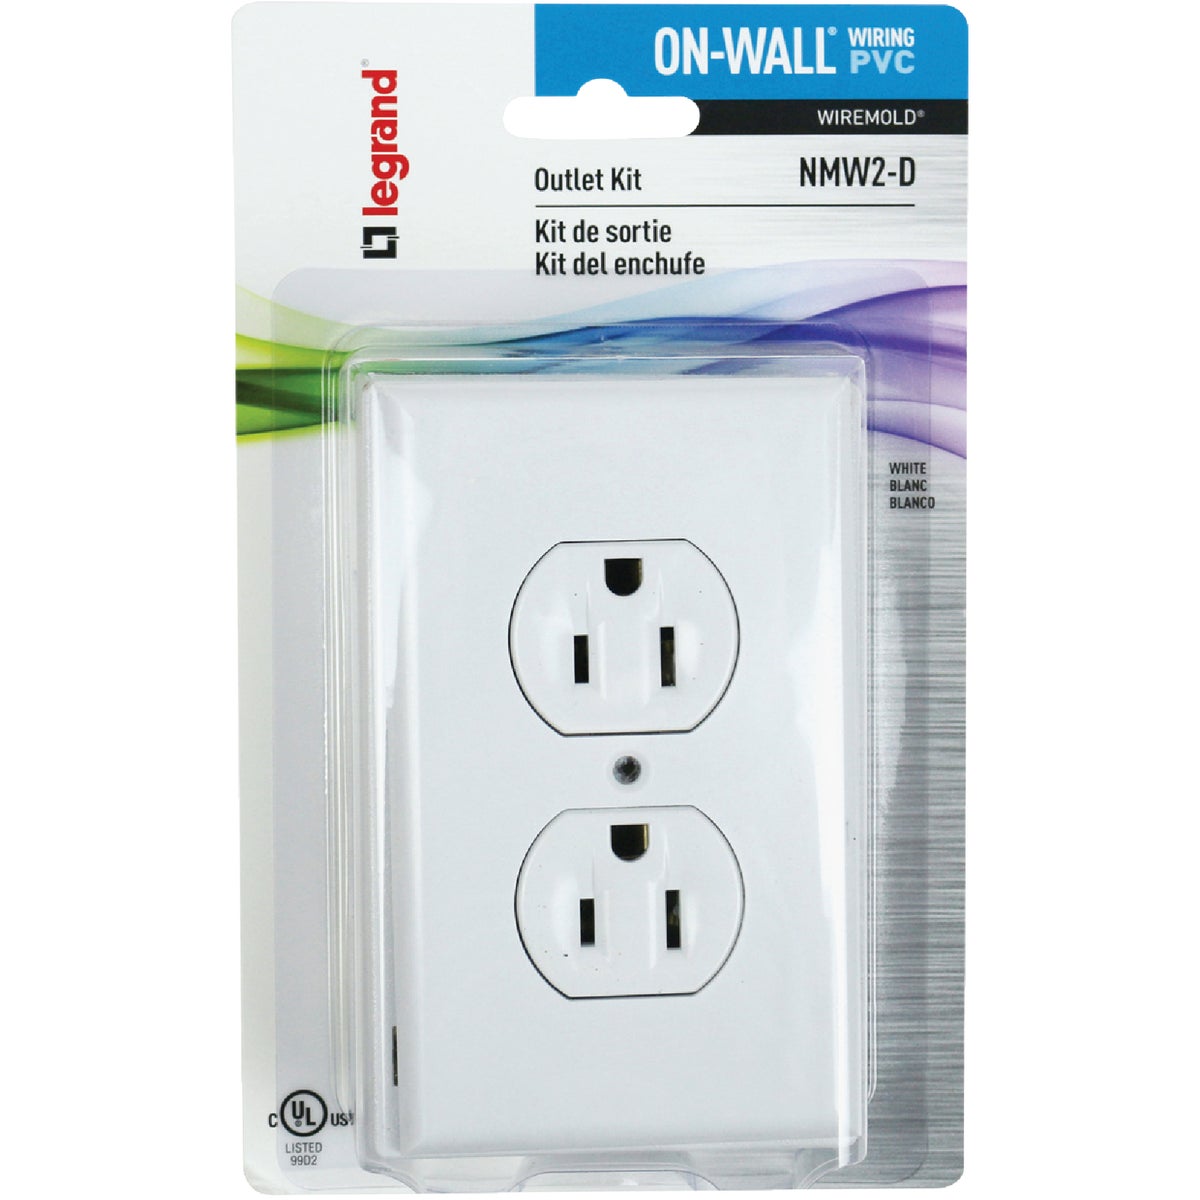 Item 510797, PVC on-wall outlet box with matching duplex outlet and wall plate.